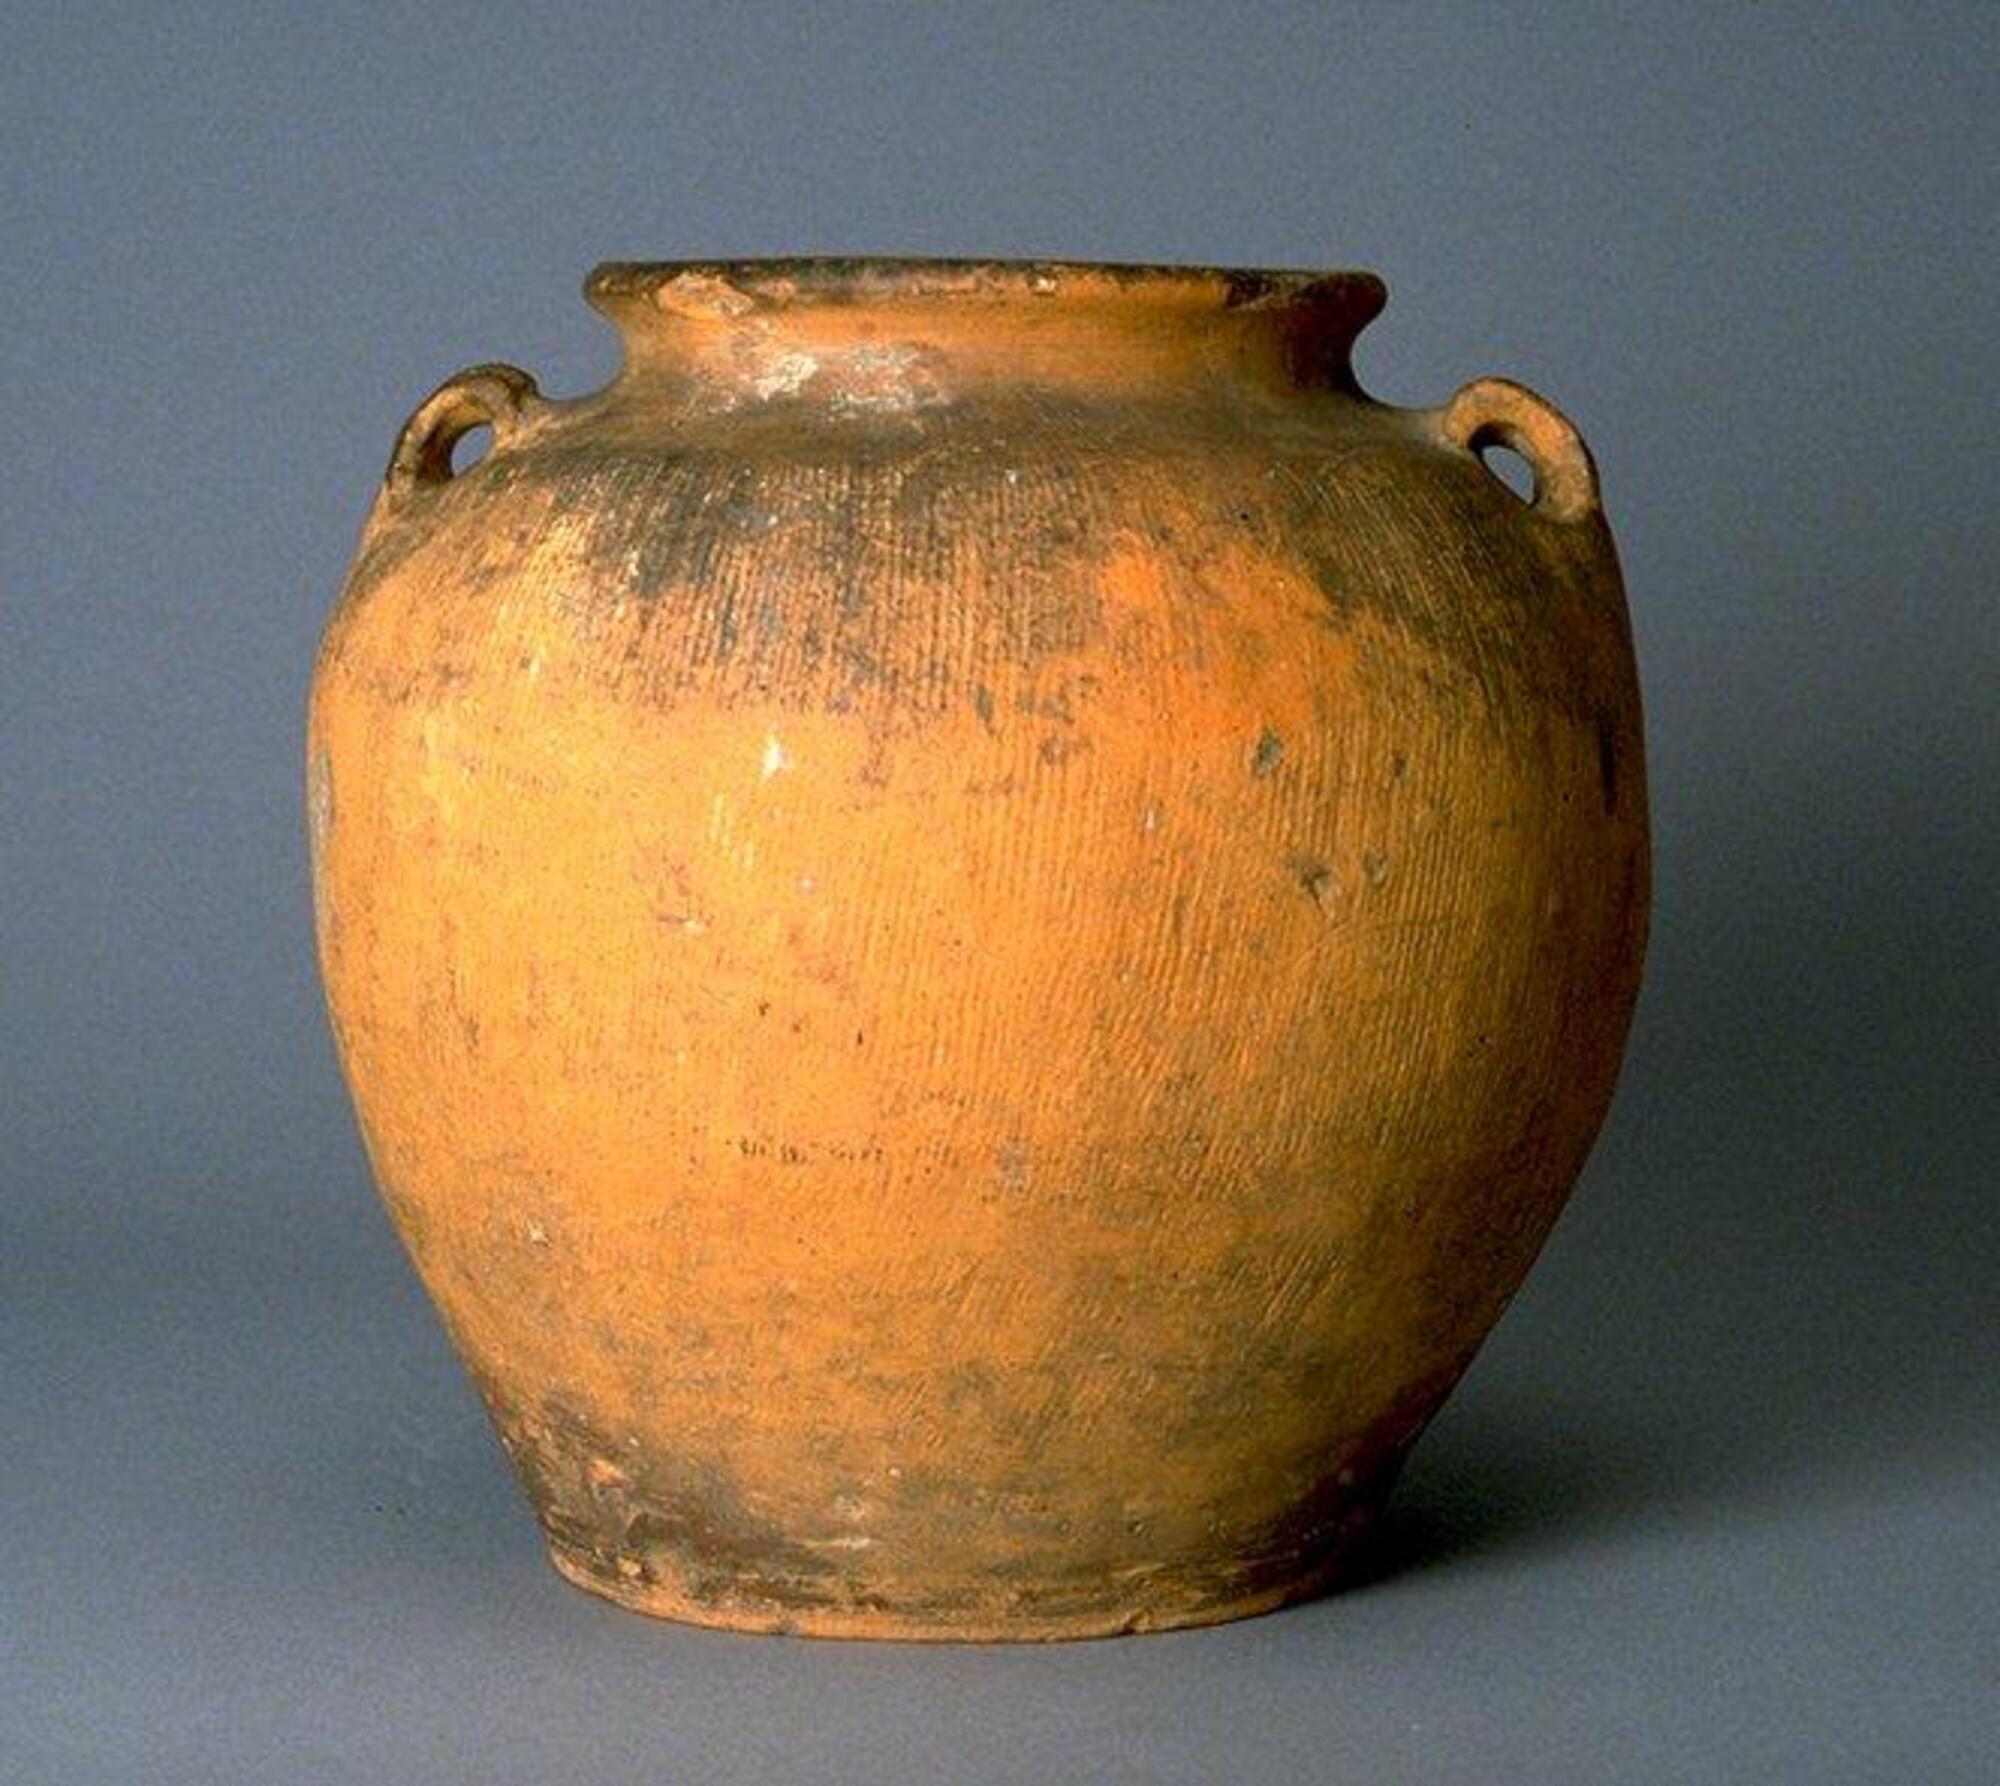 This unglazed, earthenware globular jar has a flat base, wide neck, and two lug handles applied to shoulder with a combed pattern around body.